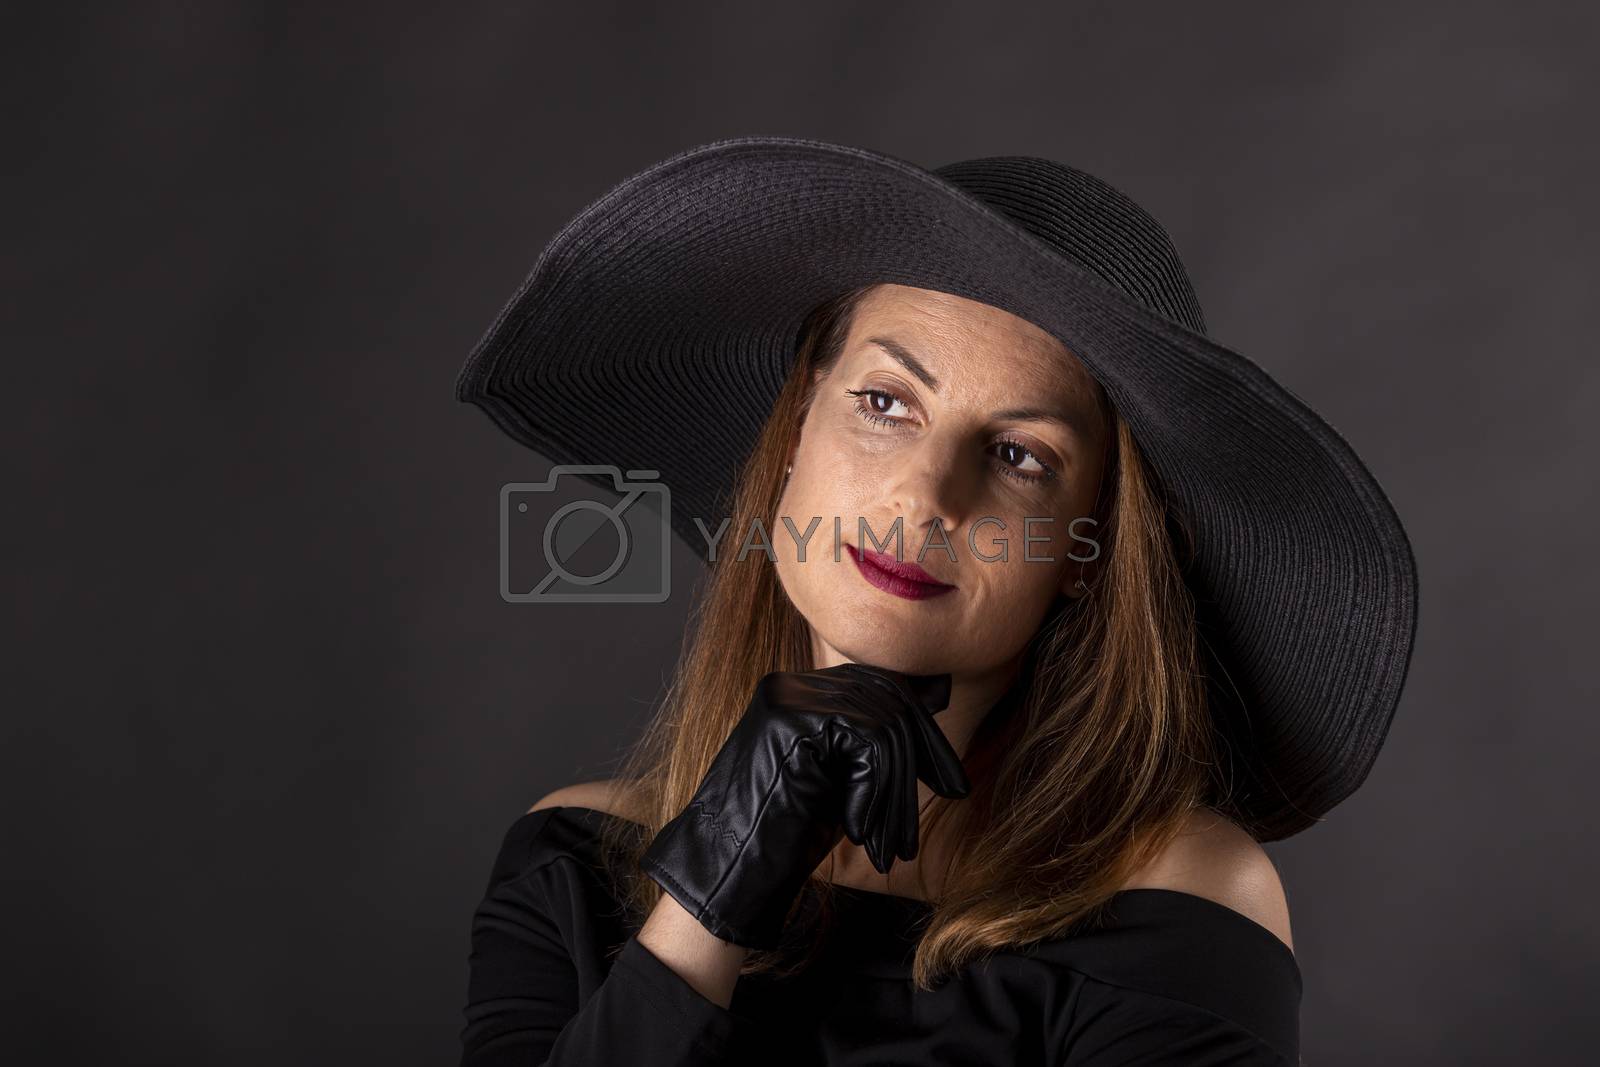 Royalty free image of black hat by bernjuer